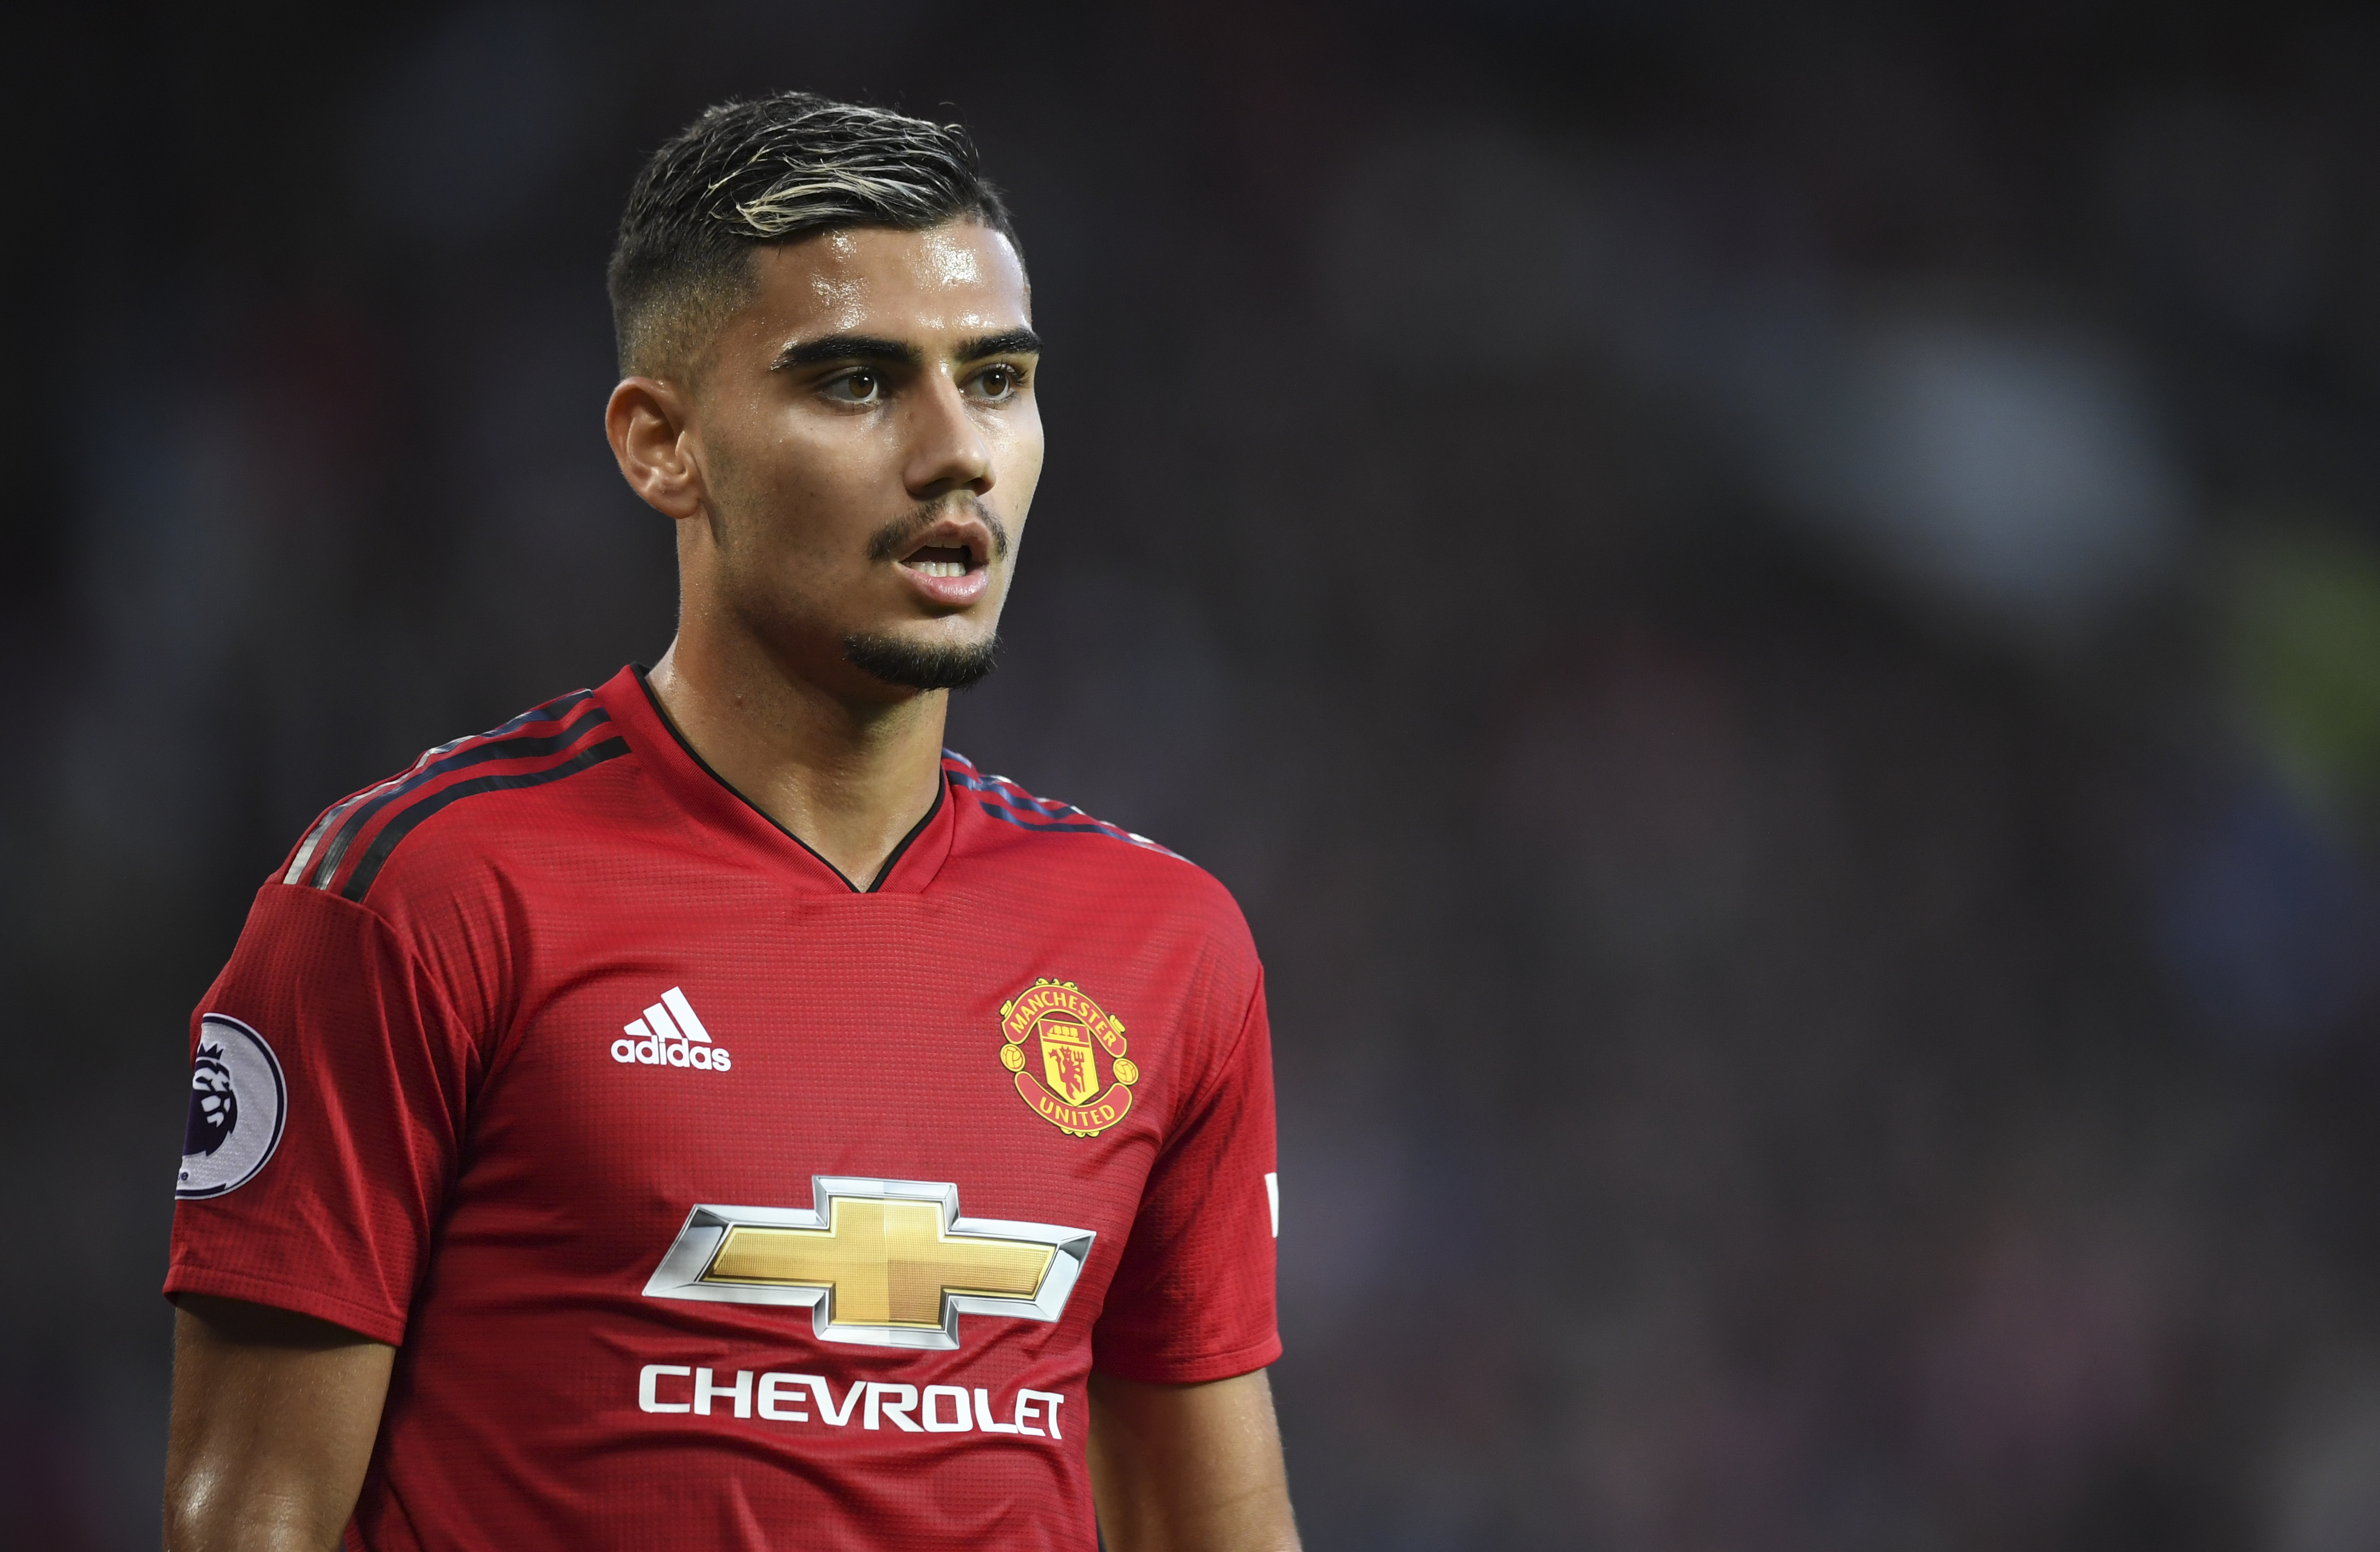 MANCHESTER, ENGLAND - AUGUST 10:  Andreas Pereira of Manchester United looks on during the Premier League match between Manchester United and Leicester City at Old Trafford on August 10, 2018 in Manchester, United Kingdom.  (Photo by Michael Regan/Getty Images)